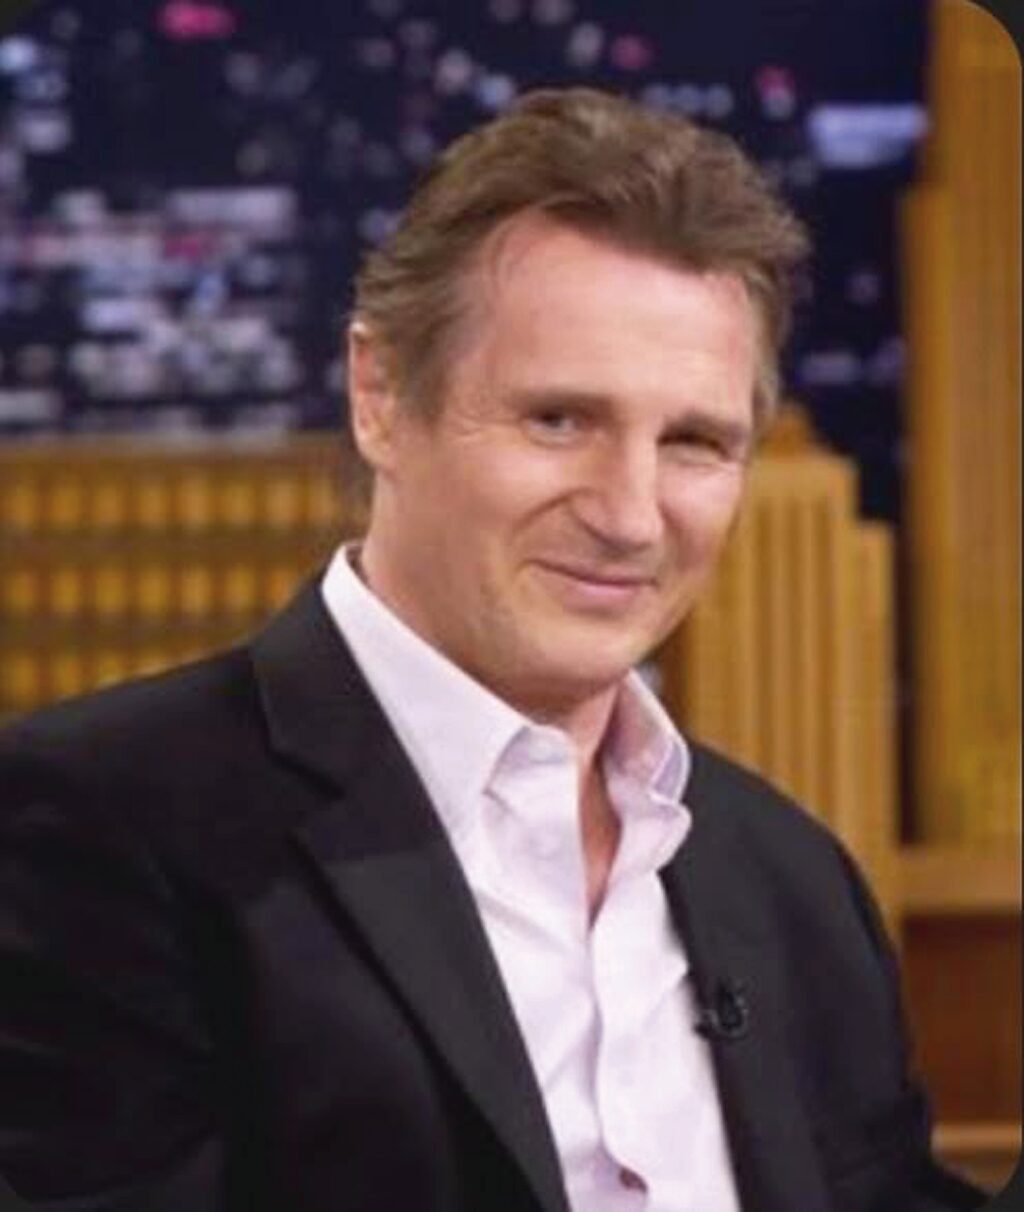 Liam Neeson to film in Gippsland next year | Gippsland Times